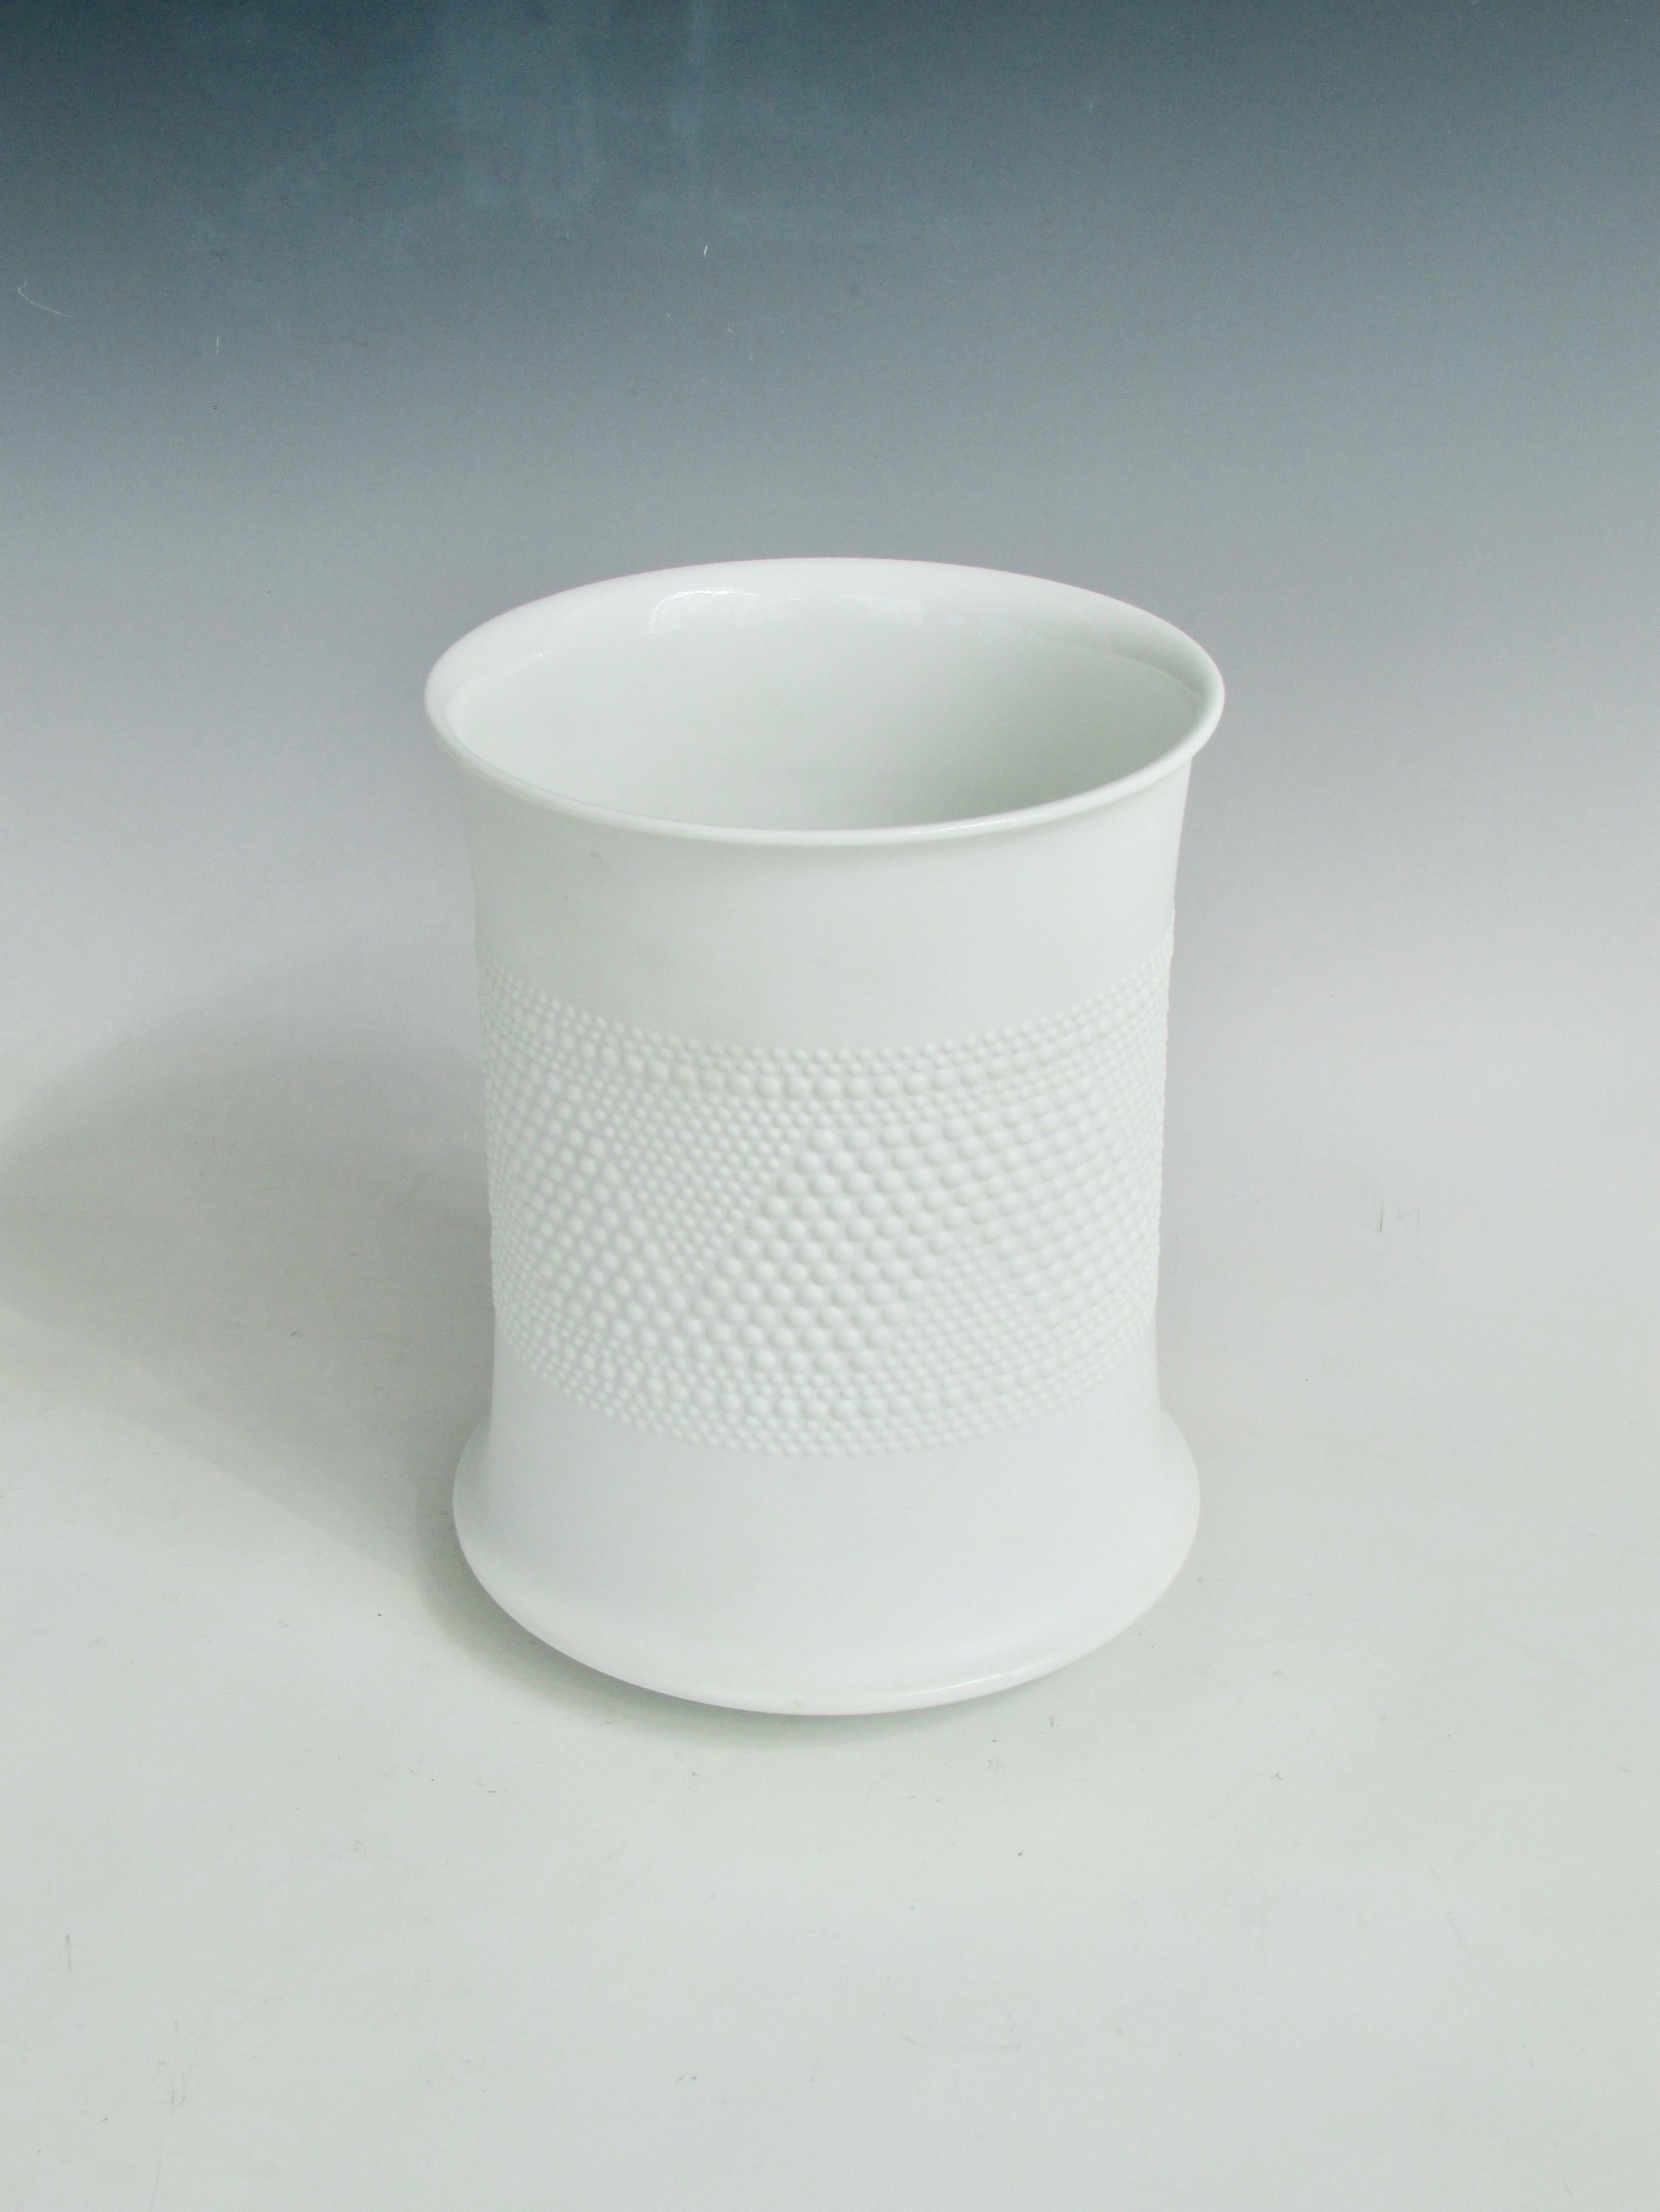 Tall cylinder shaped white porcelain vase with flared opening . Designed 1970 by Tapio Wirkkala for Rosenthal Studio Line . Tactile ‘Drops’ designed on its exterior . Matte finish exterior with gloss glaze interior. Marked underside. Excellent